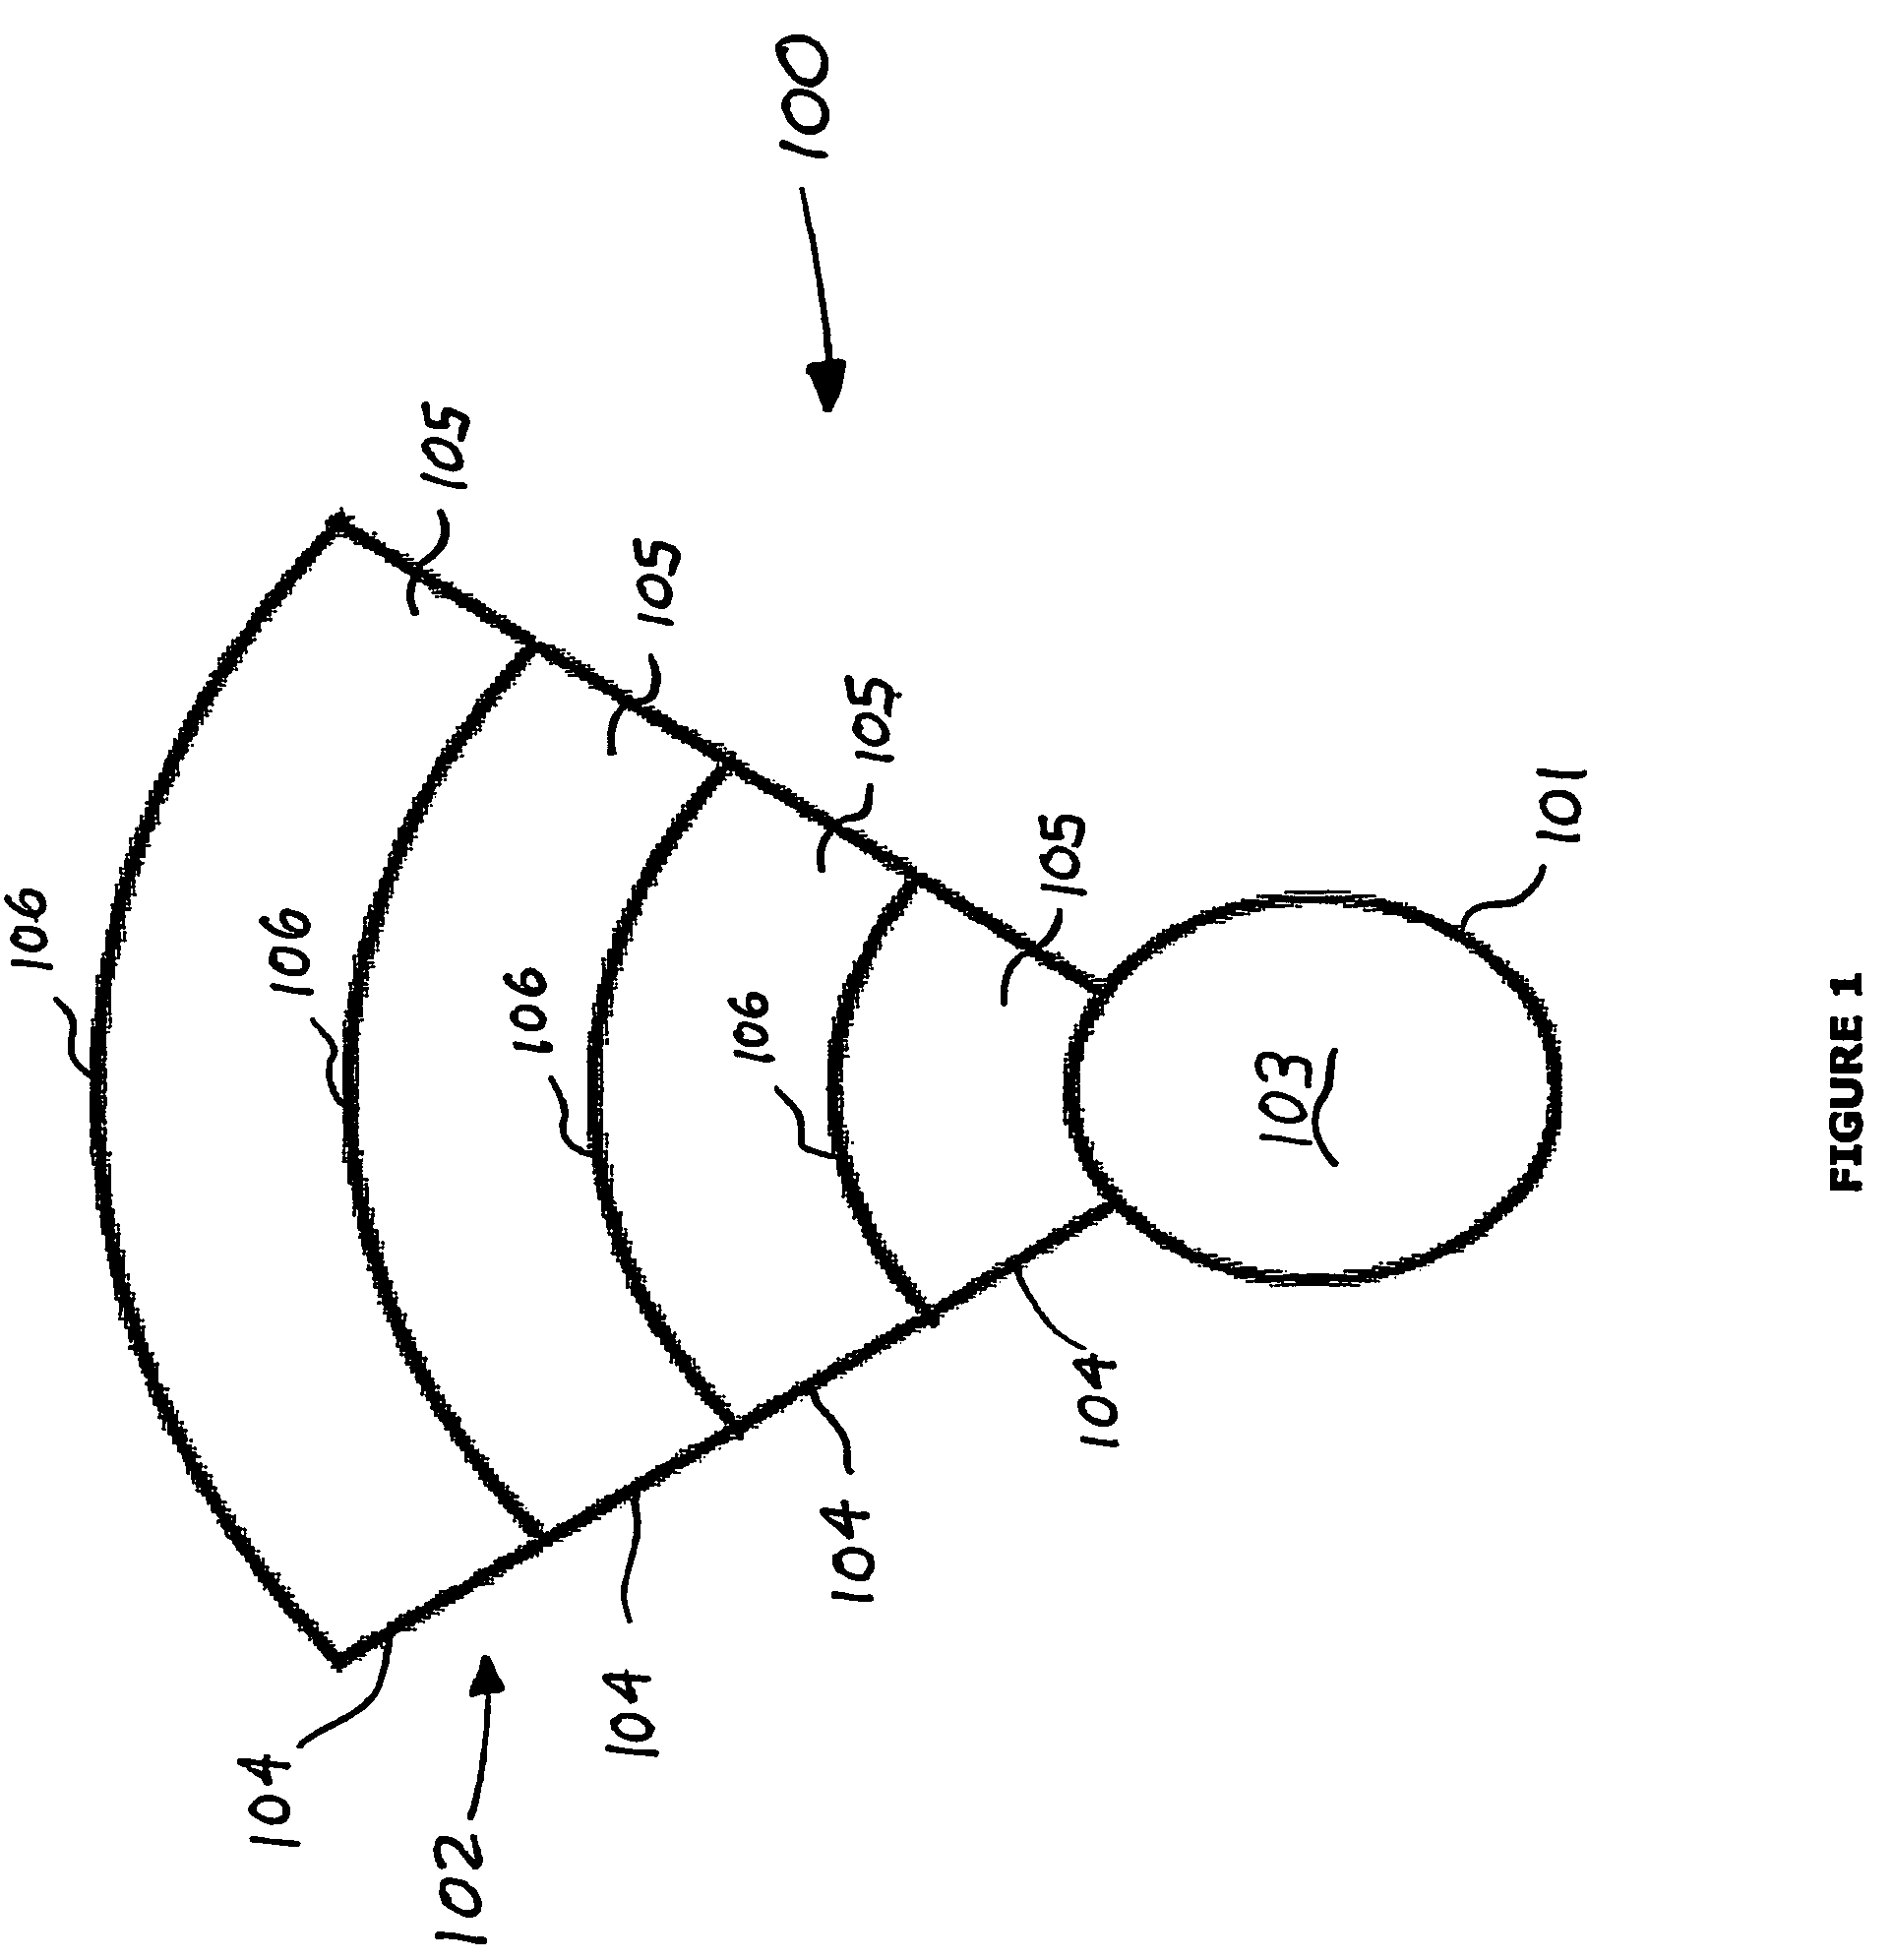 Apparatus and method for optimizing a surgical incision on the breast